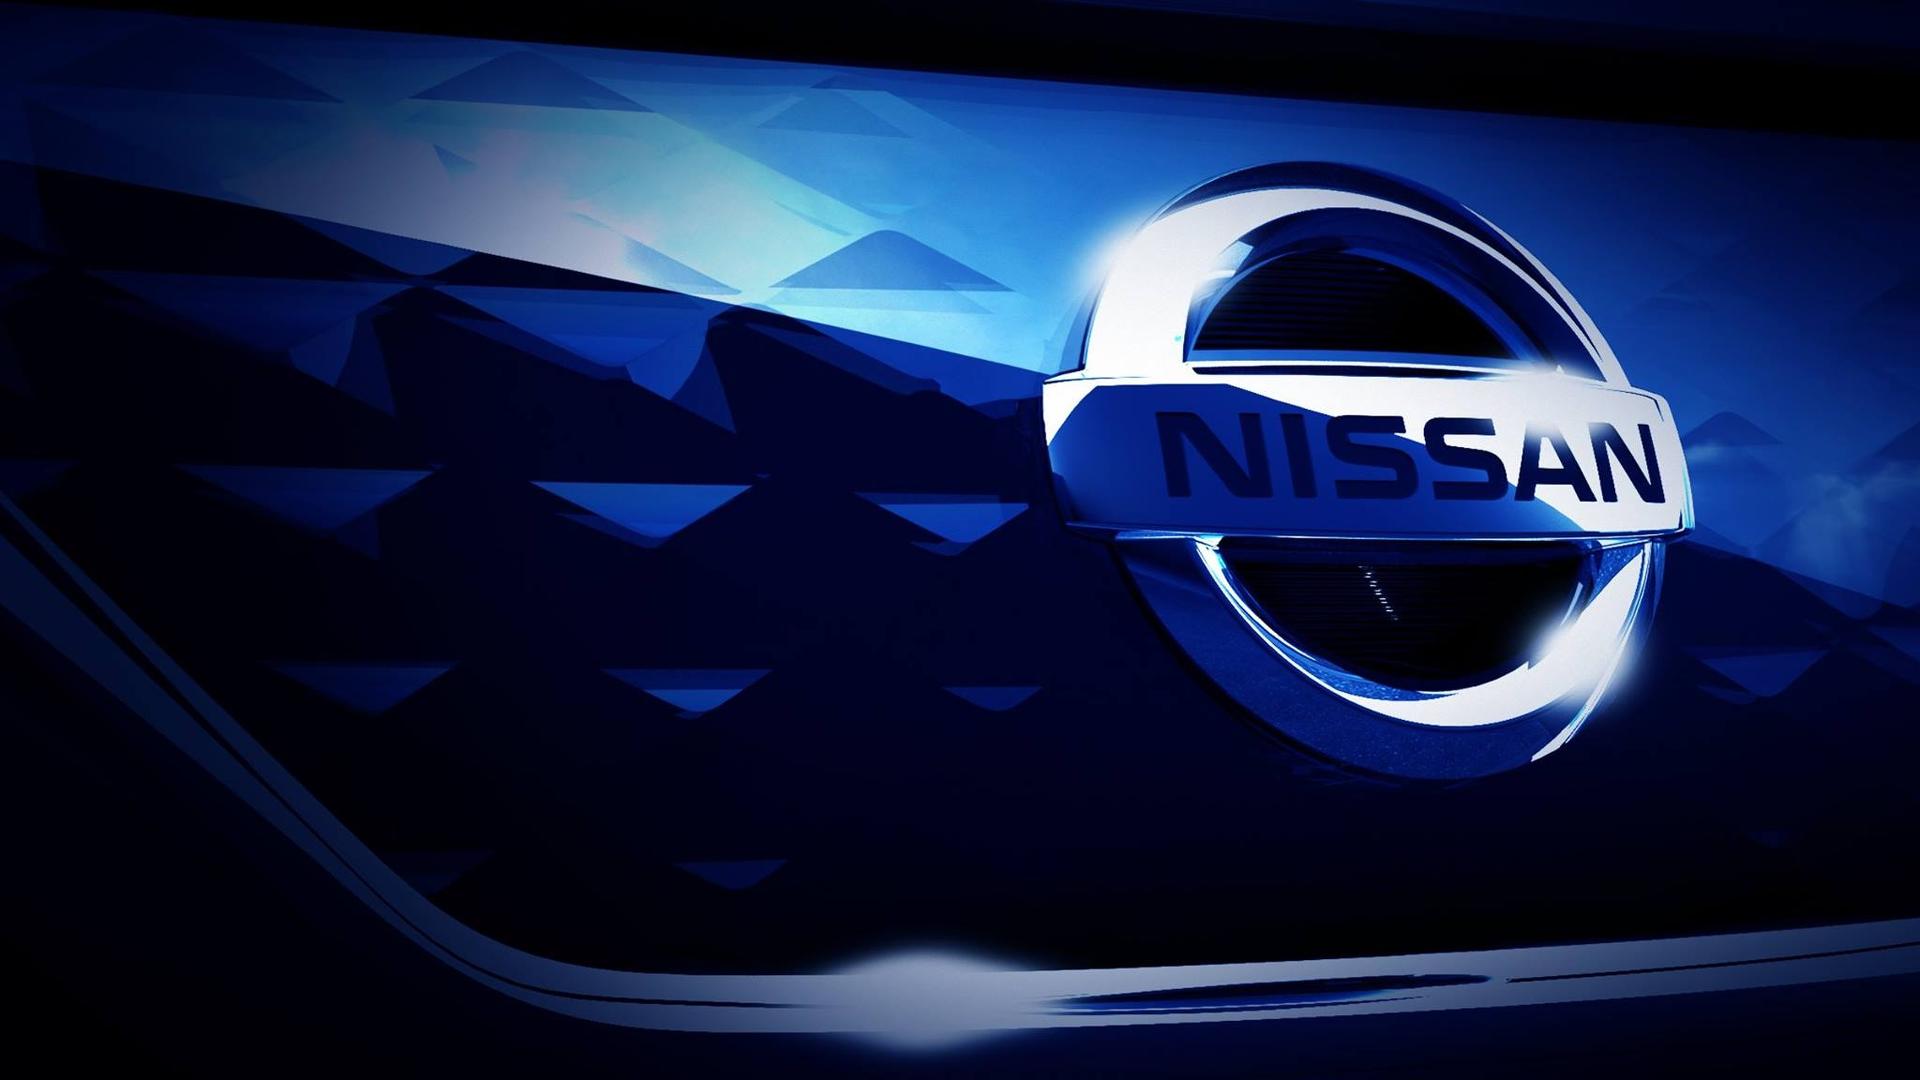 Second Generation Nissan Leaf Shows Off Its Grille In Latest Teaser